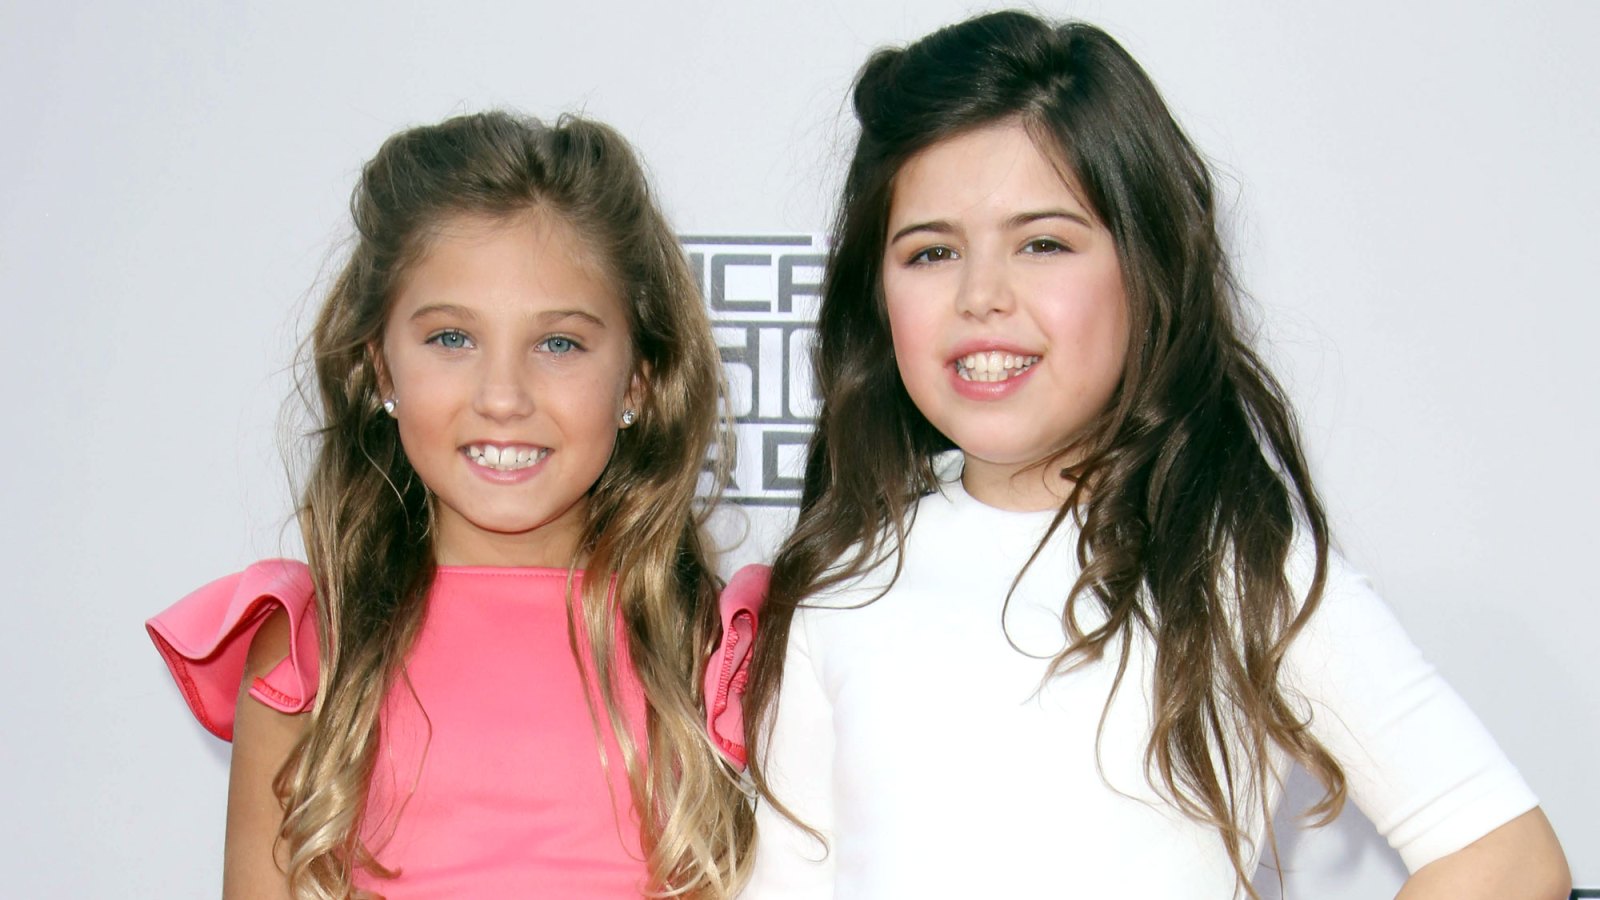 Sophia Grace and Rosie Reunite Nearly 8 Years After 1st ‘Ellen’ Appearance